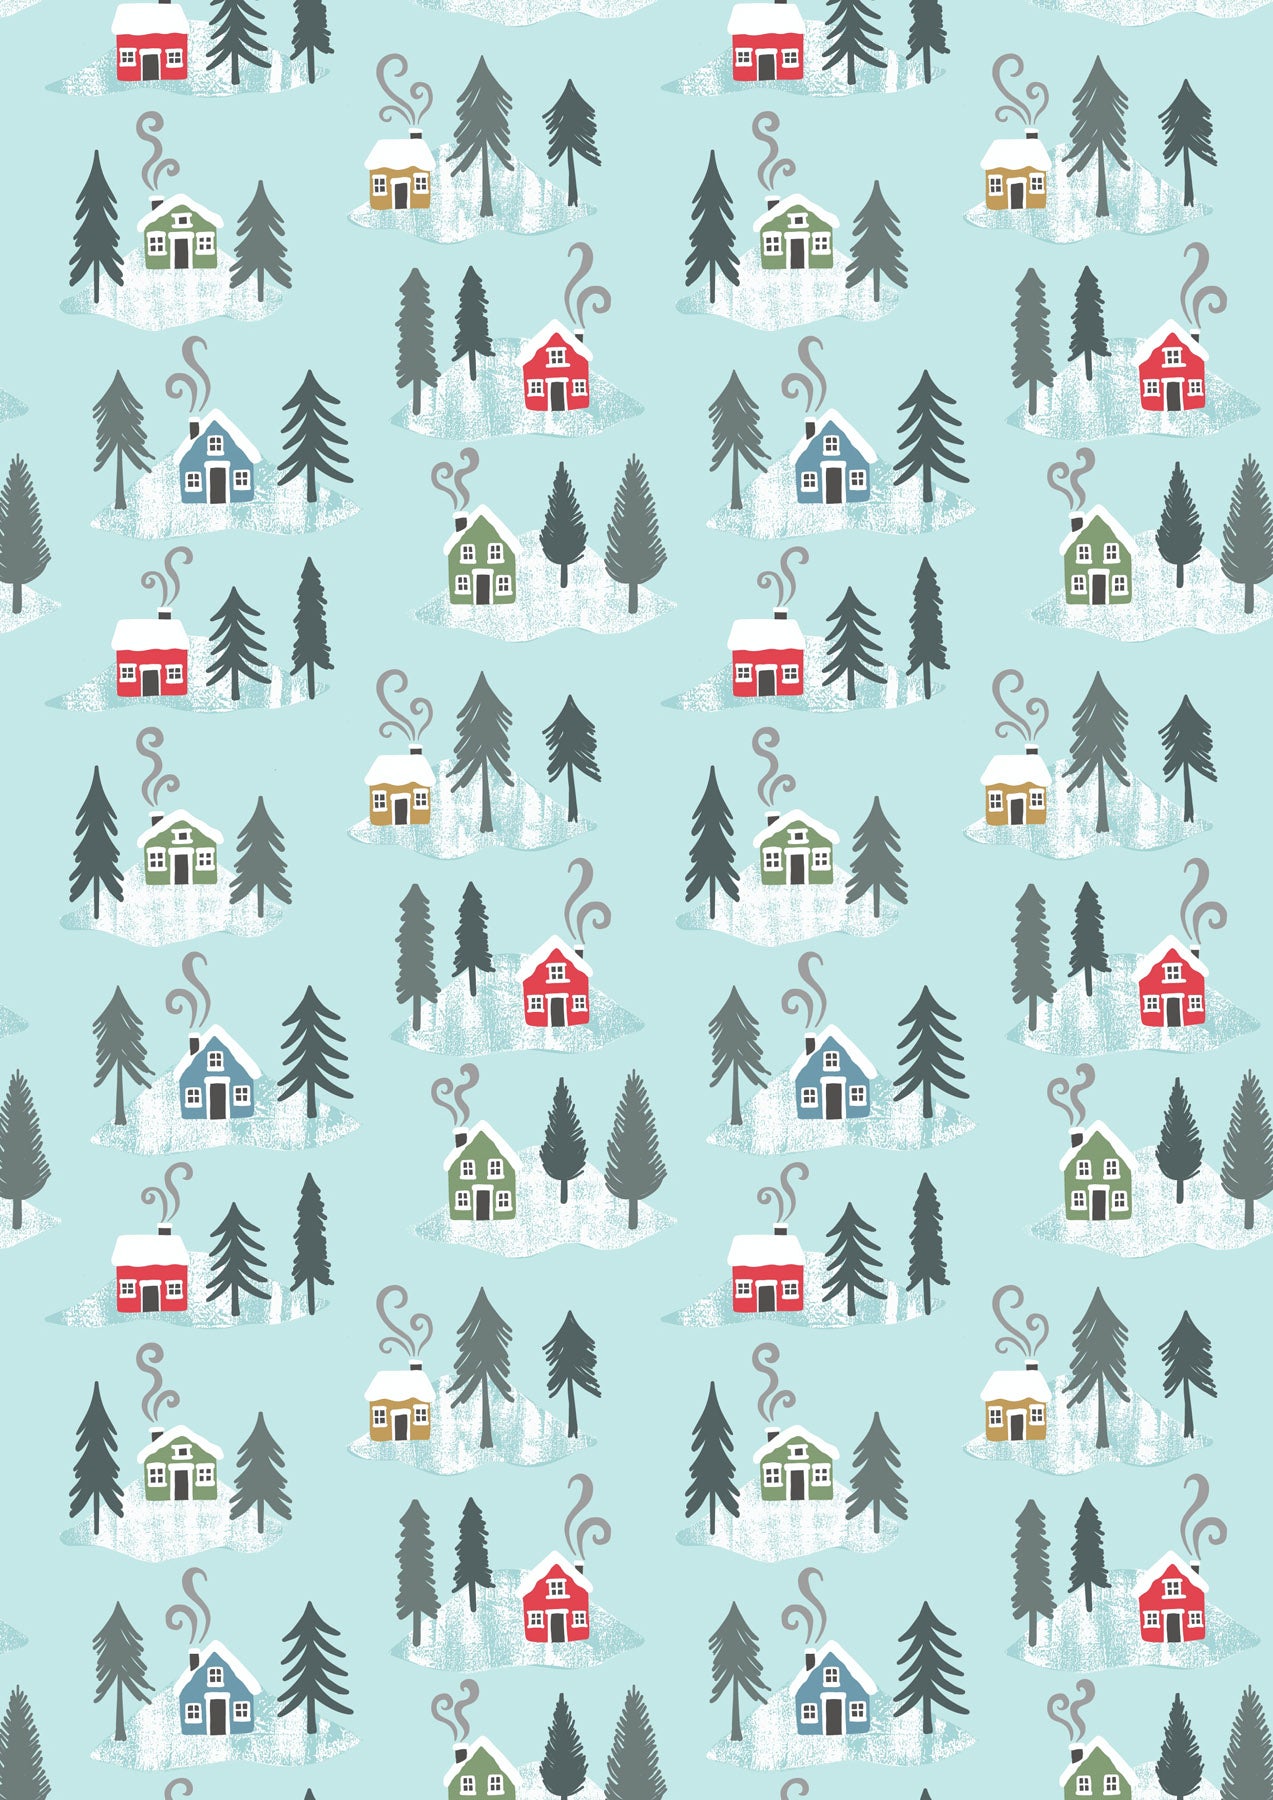 Snow Day Houses on Icy Blue Brushed Cotton